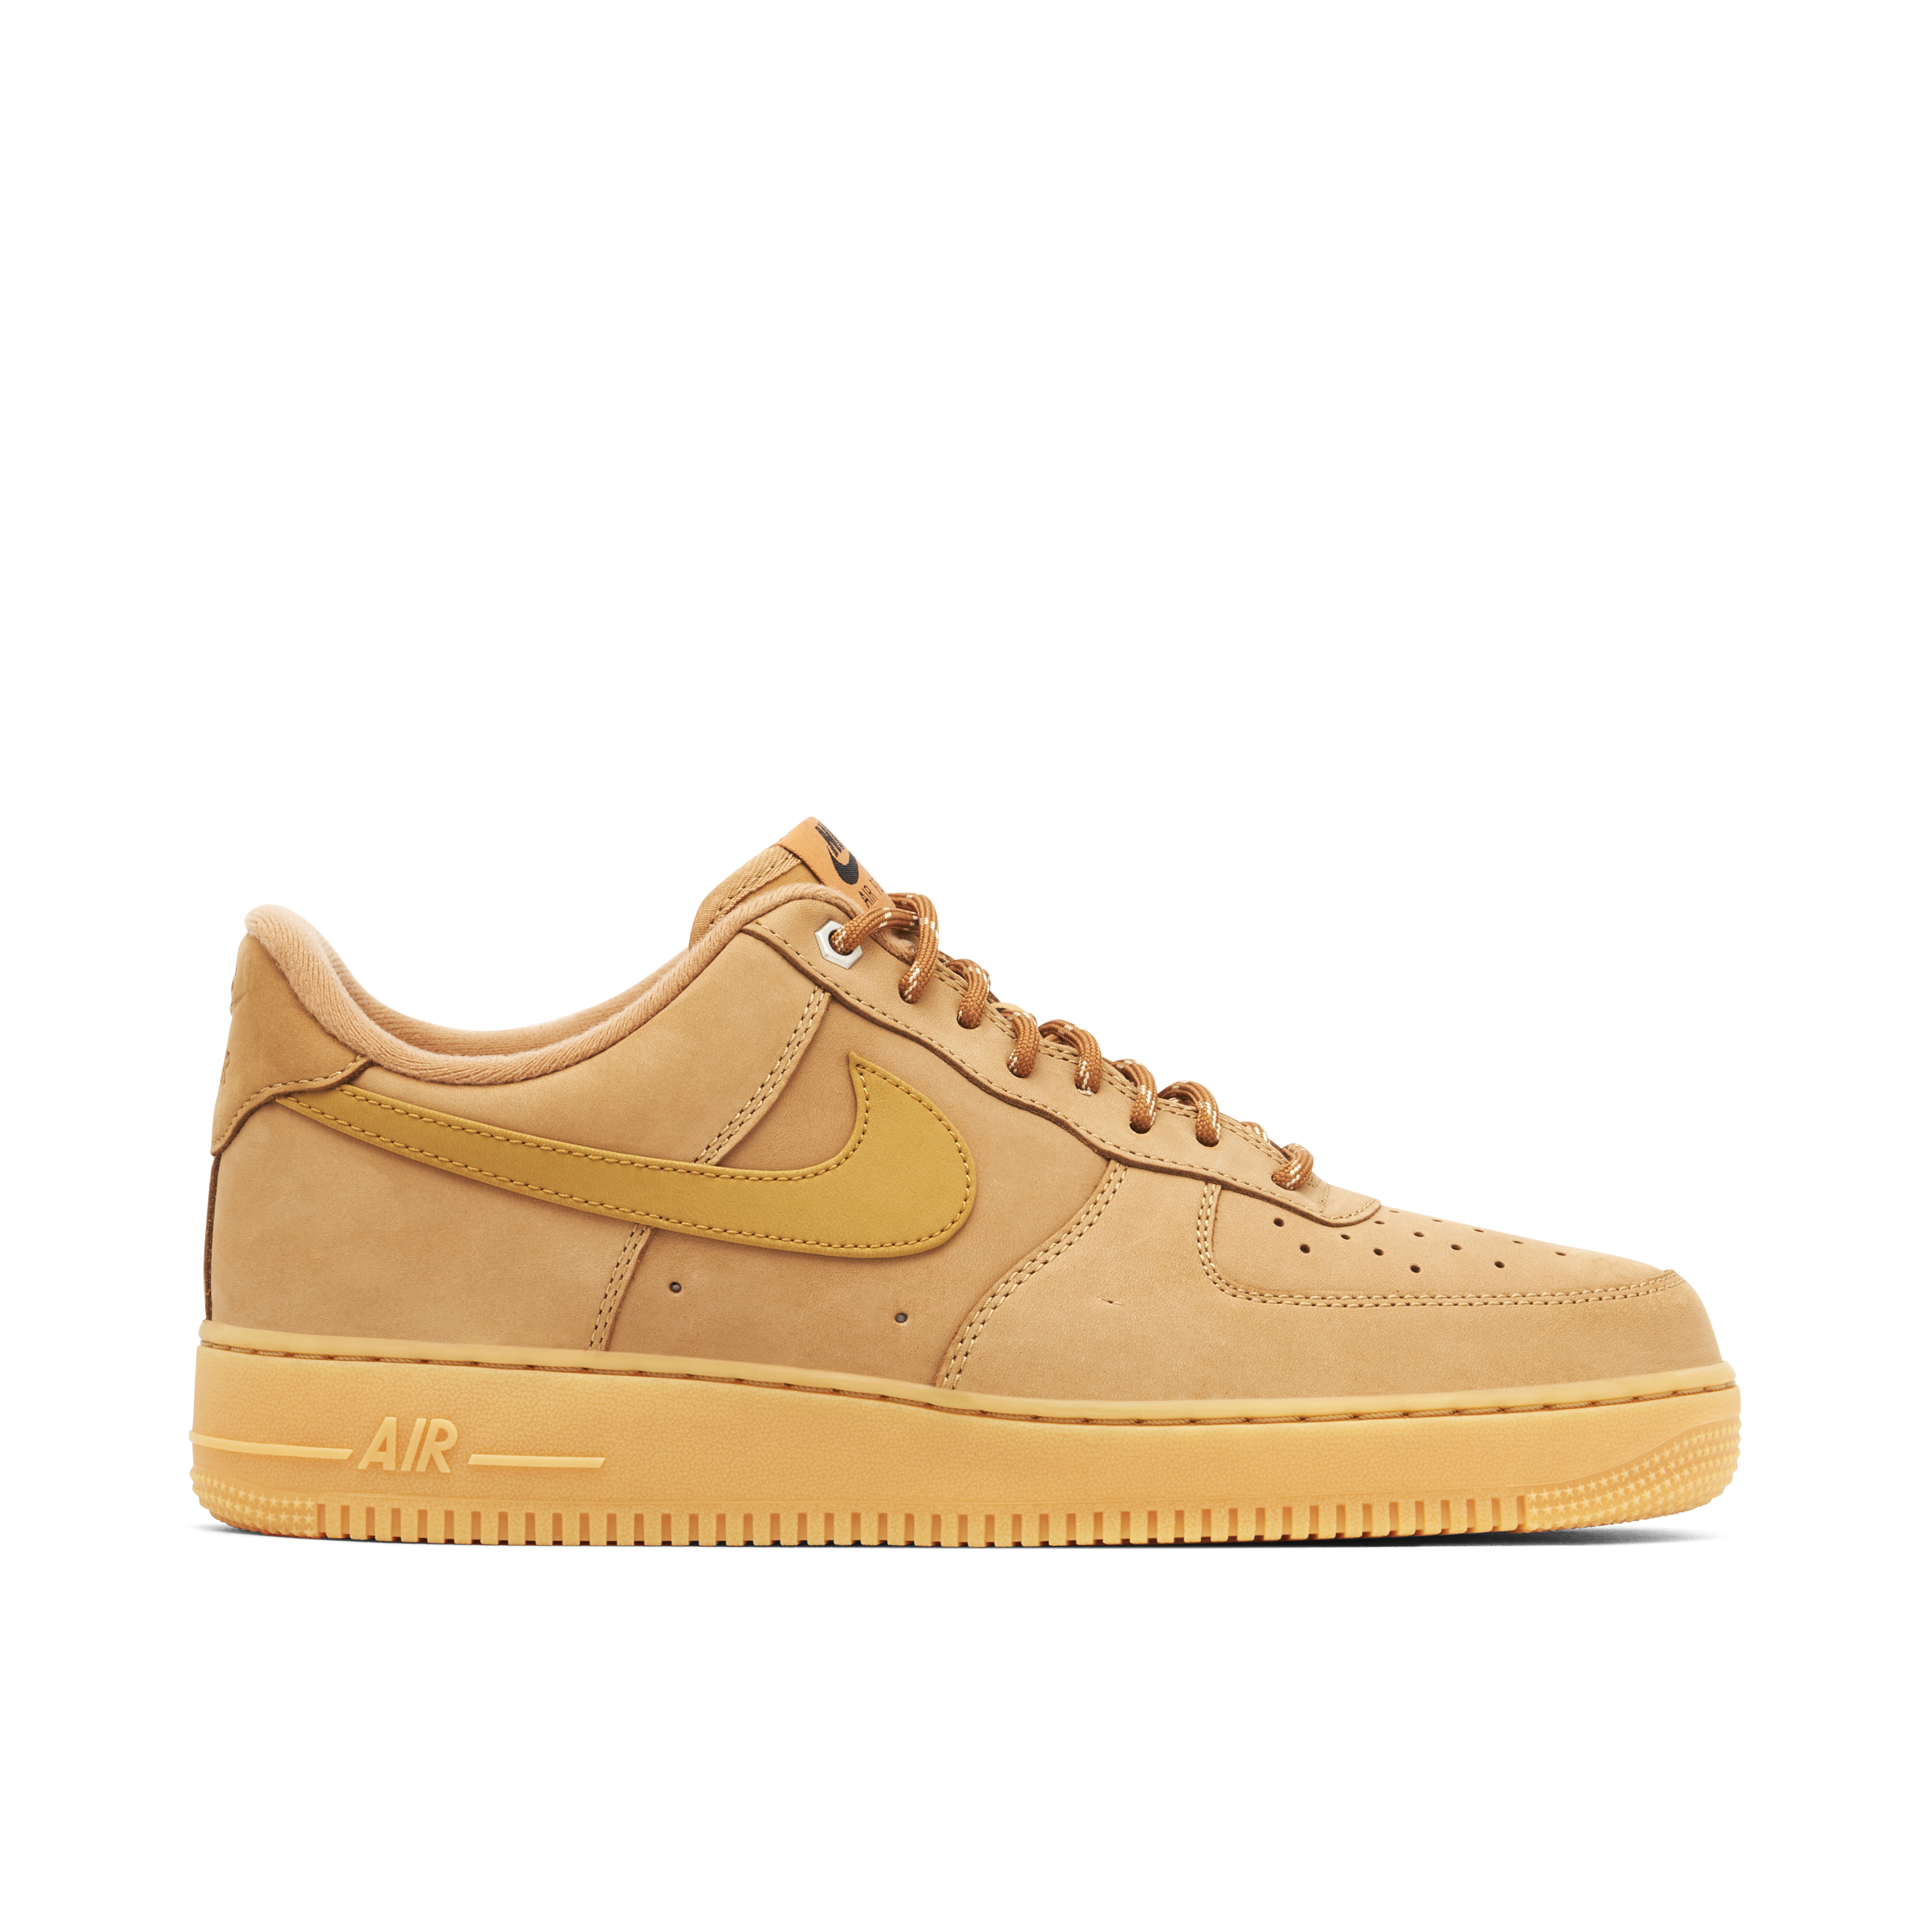 Nike Air Force 1 Low Flax Brown | CJ9179-200 | Laced